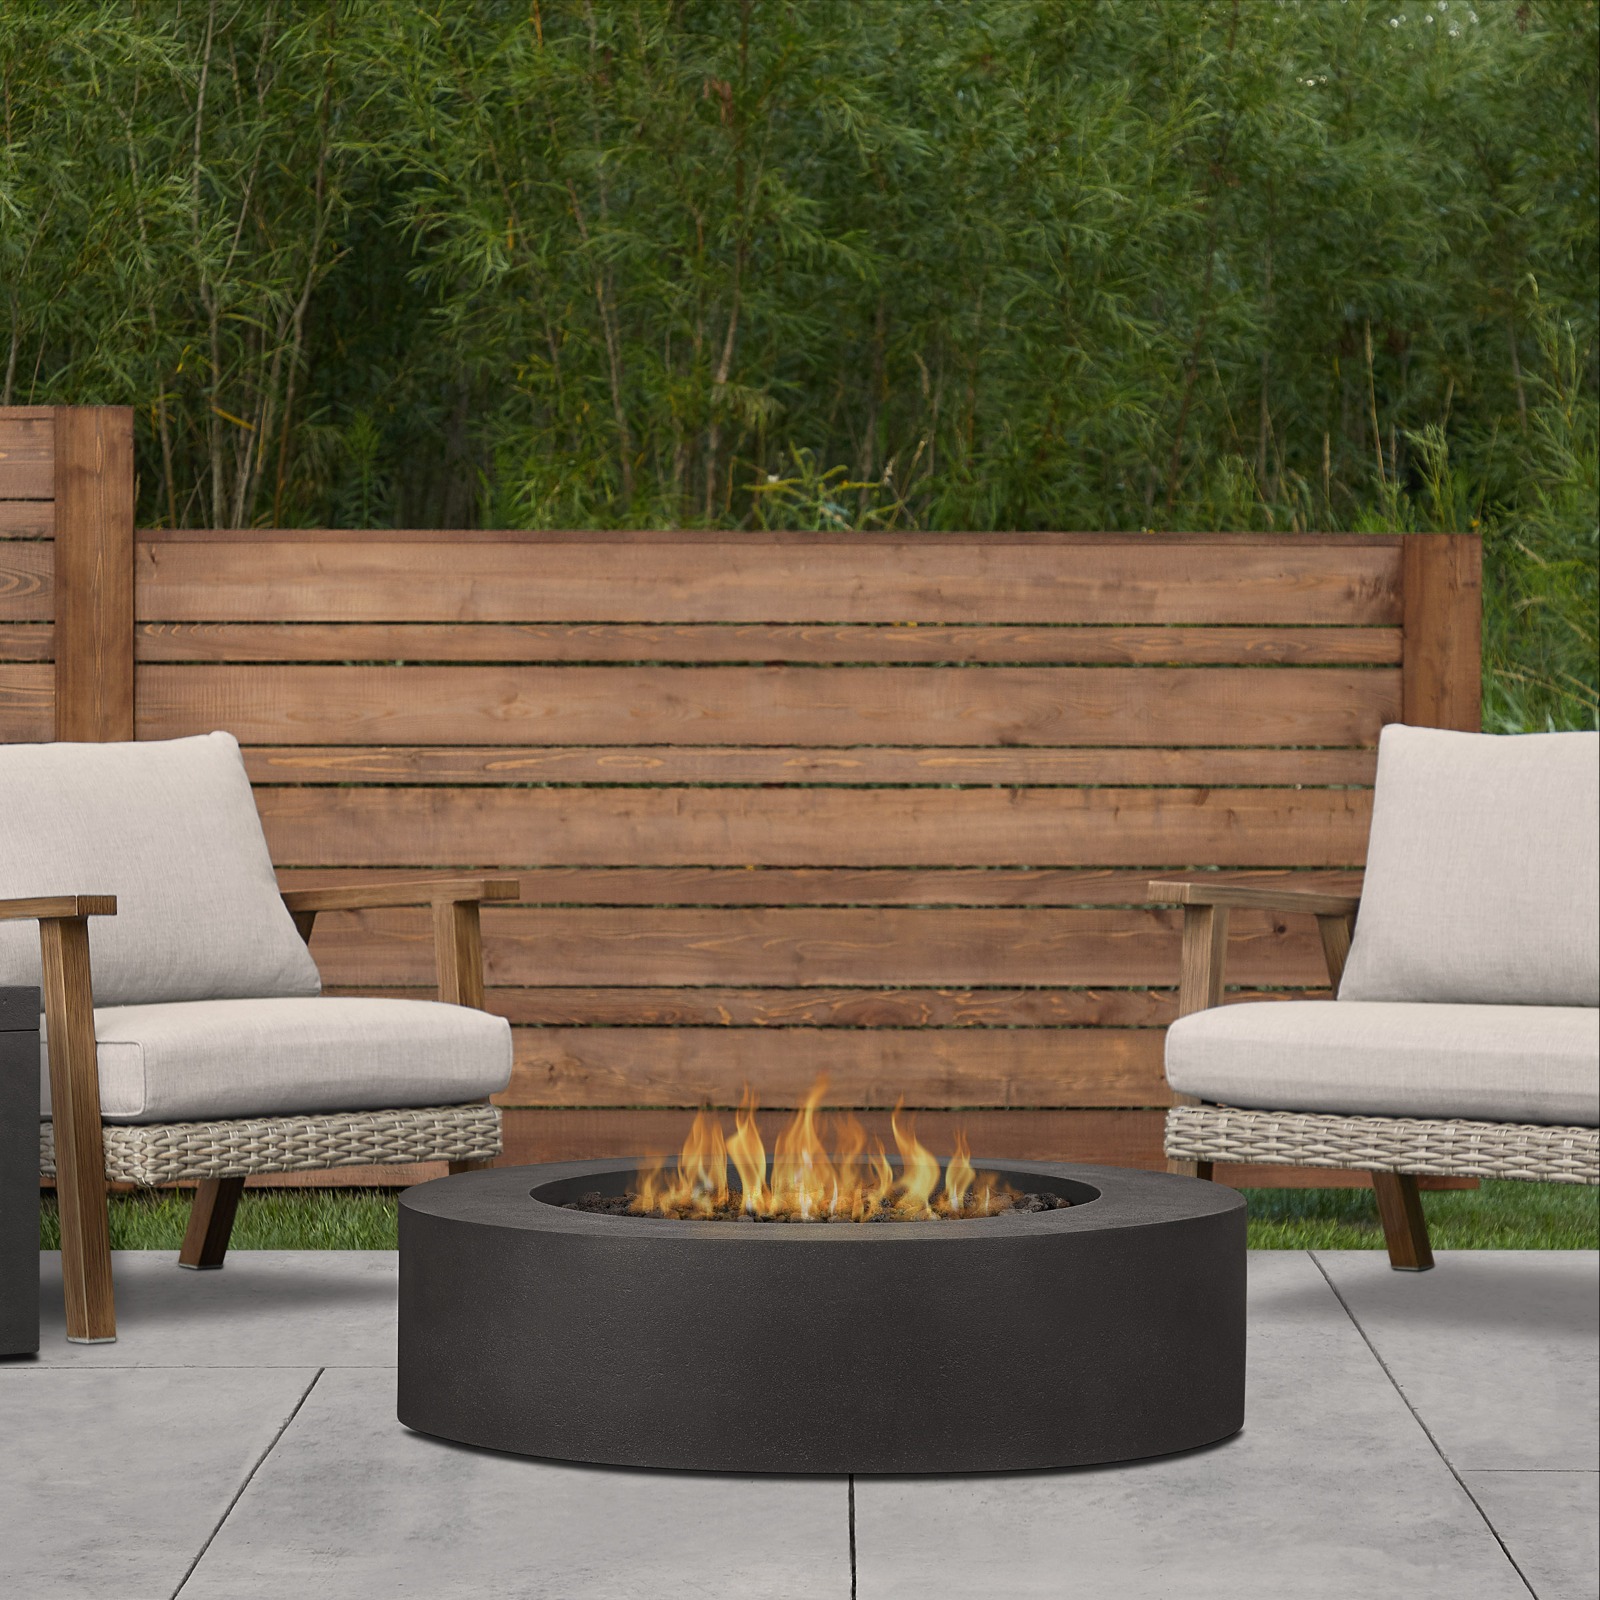 43" La Valle  Round Propane Fire Table in Carbon.